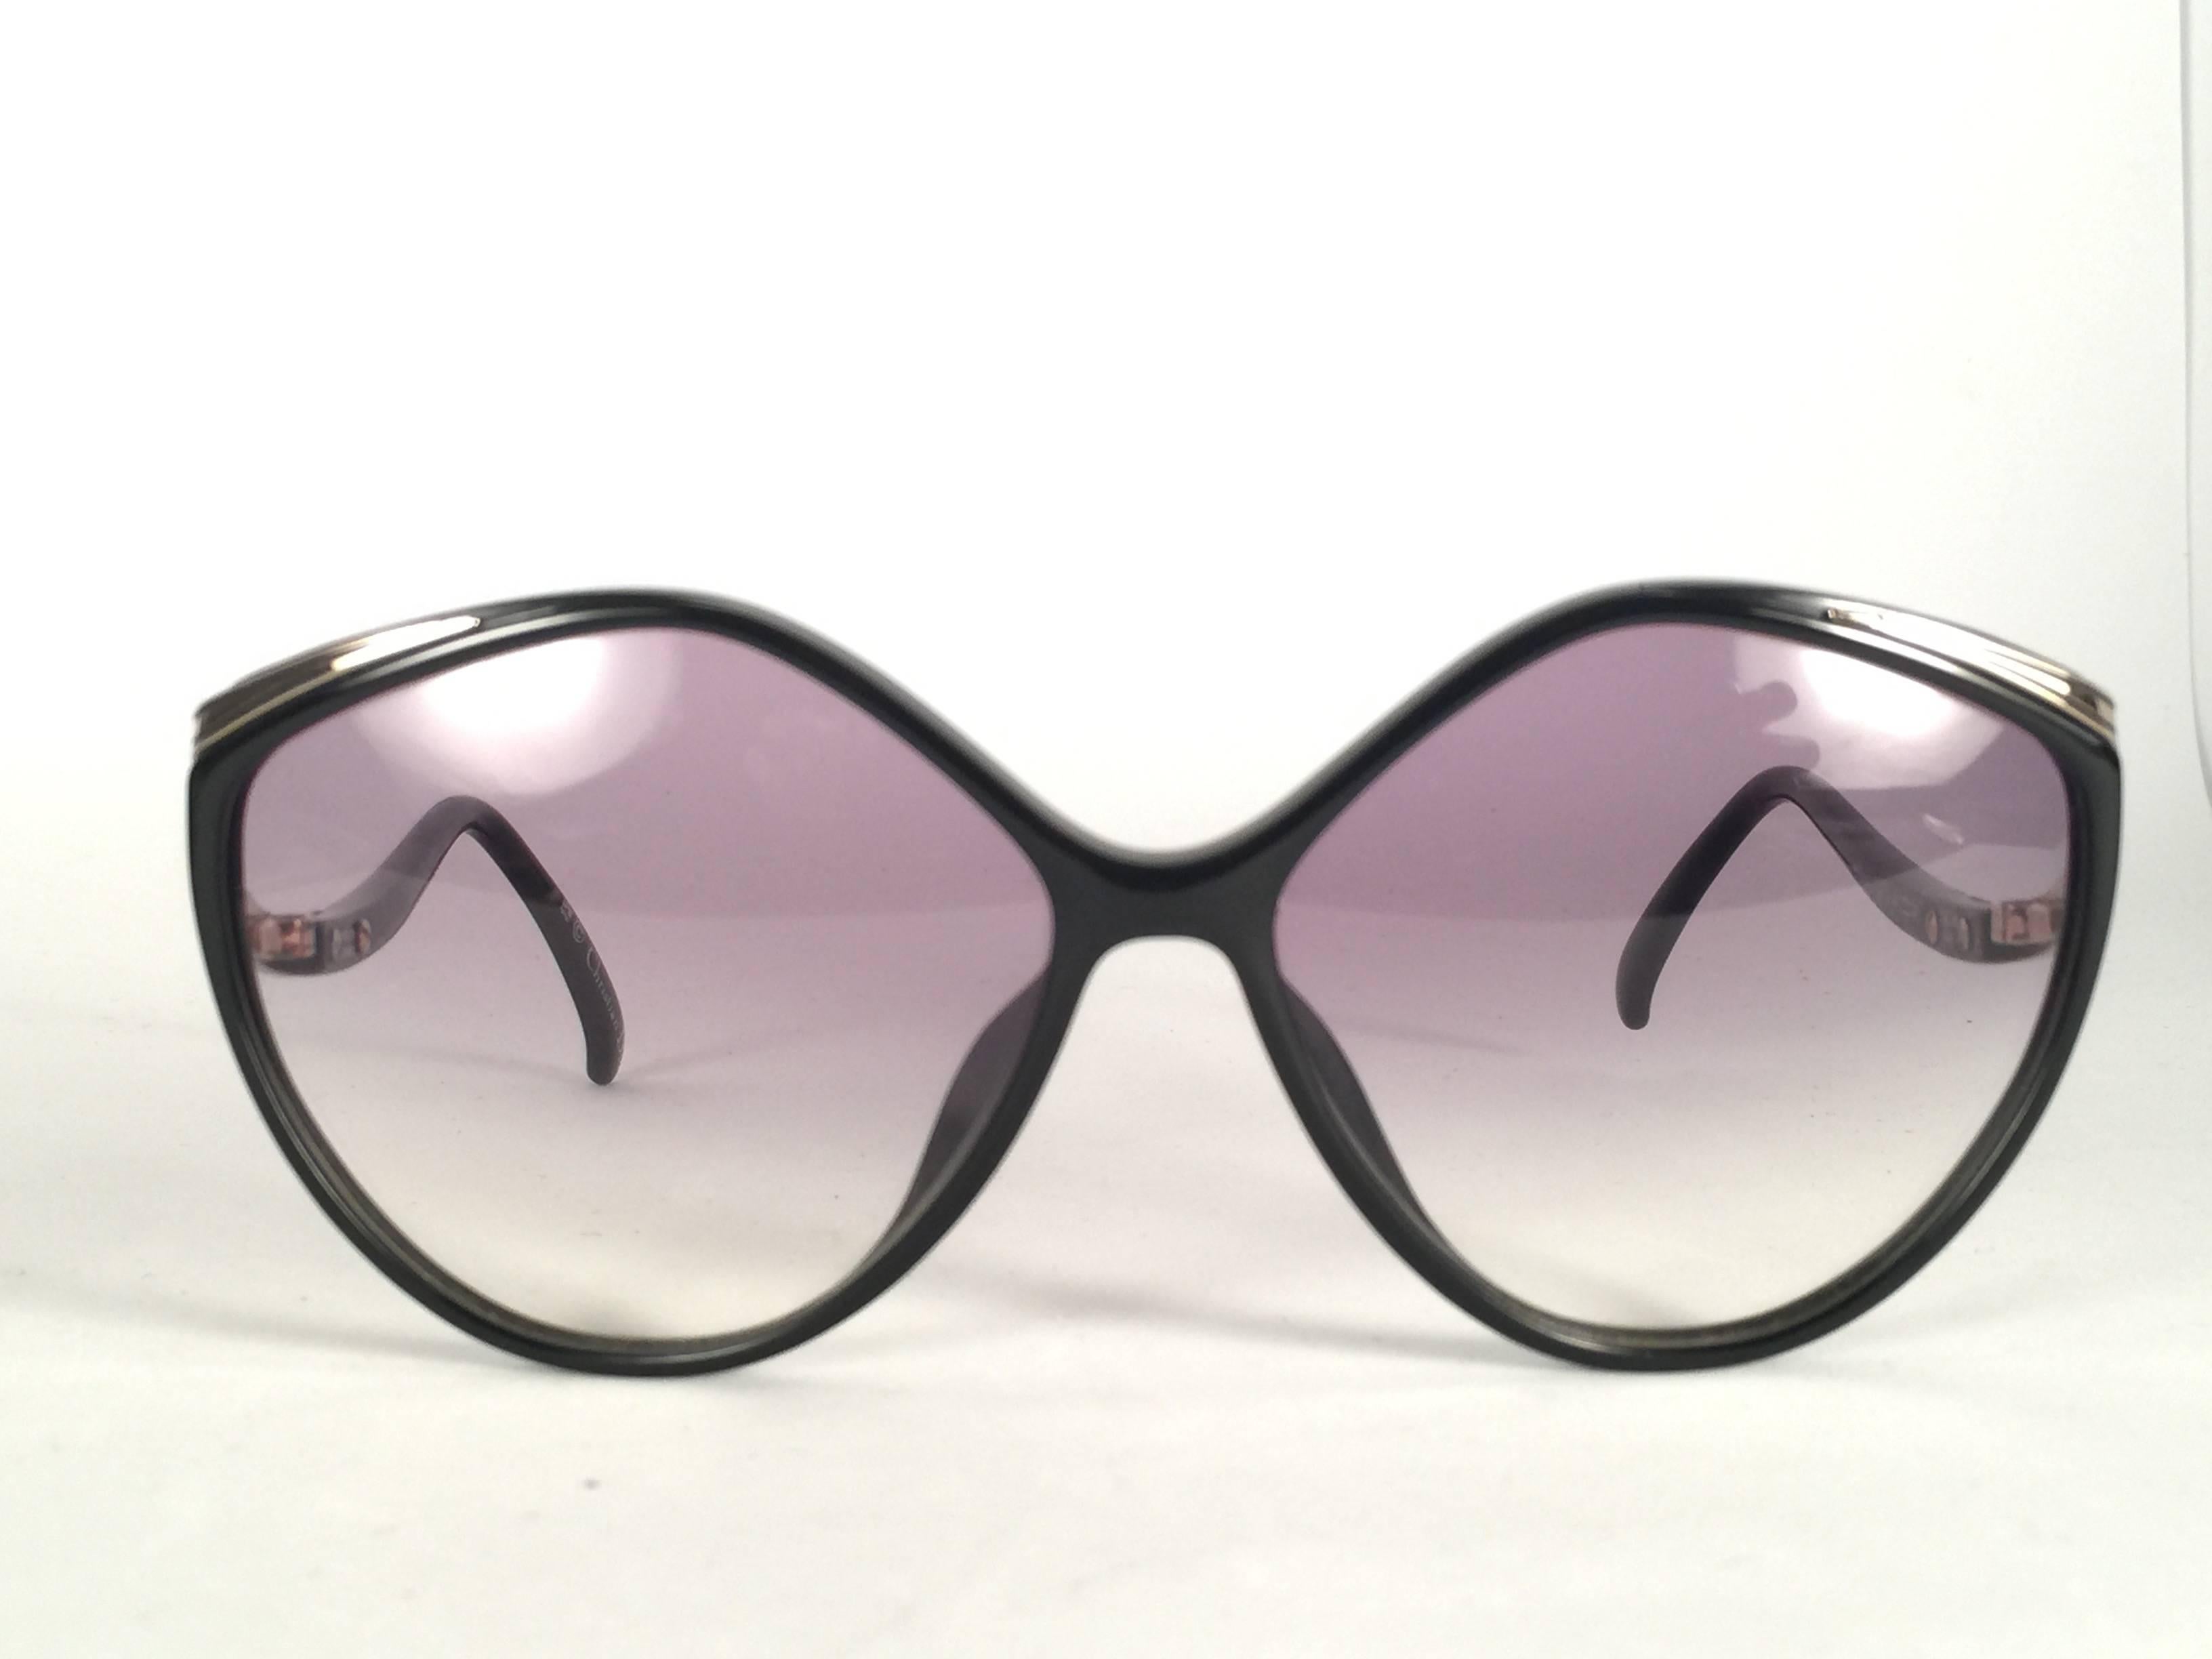 Mint Vintage Christian Dior 2280 Black frame with spotless light gradient lenses.   Made in Germany.  Produced and design in 1970's.  Comes with its original silver Christian Dior Lunettes sleeve.